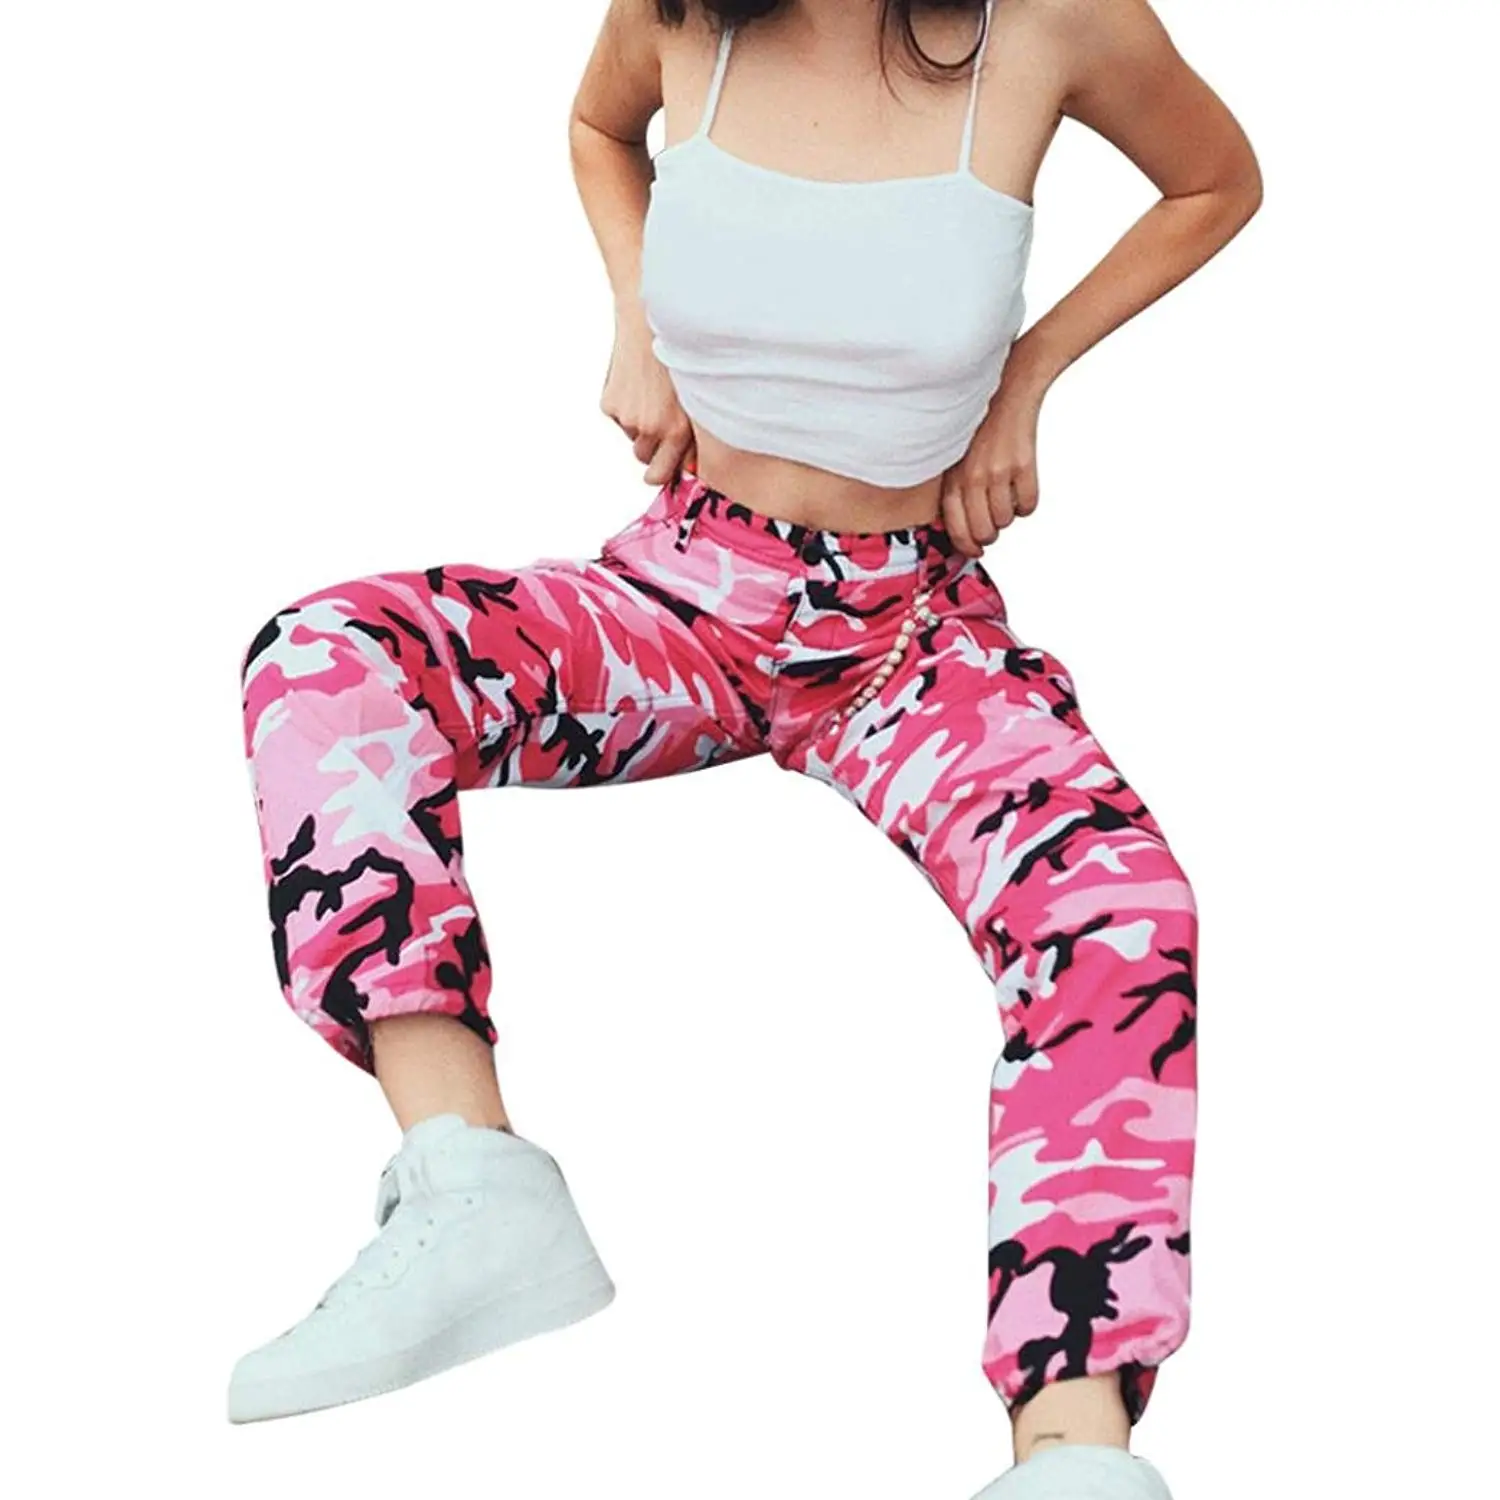 pink camo cargo trousers